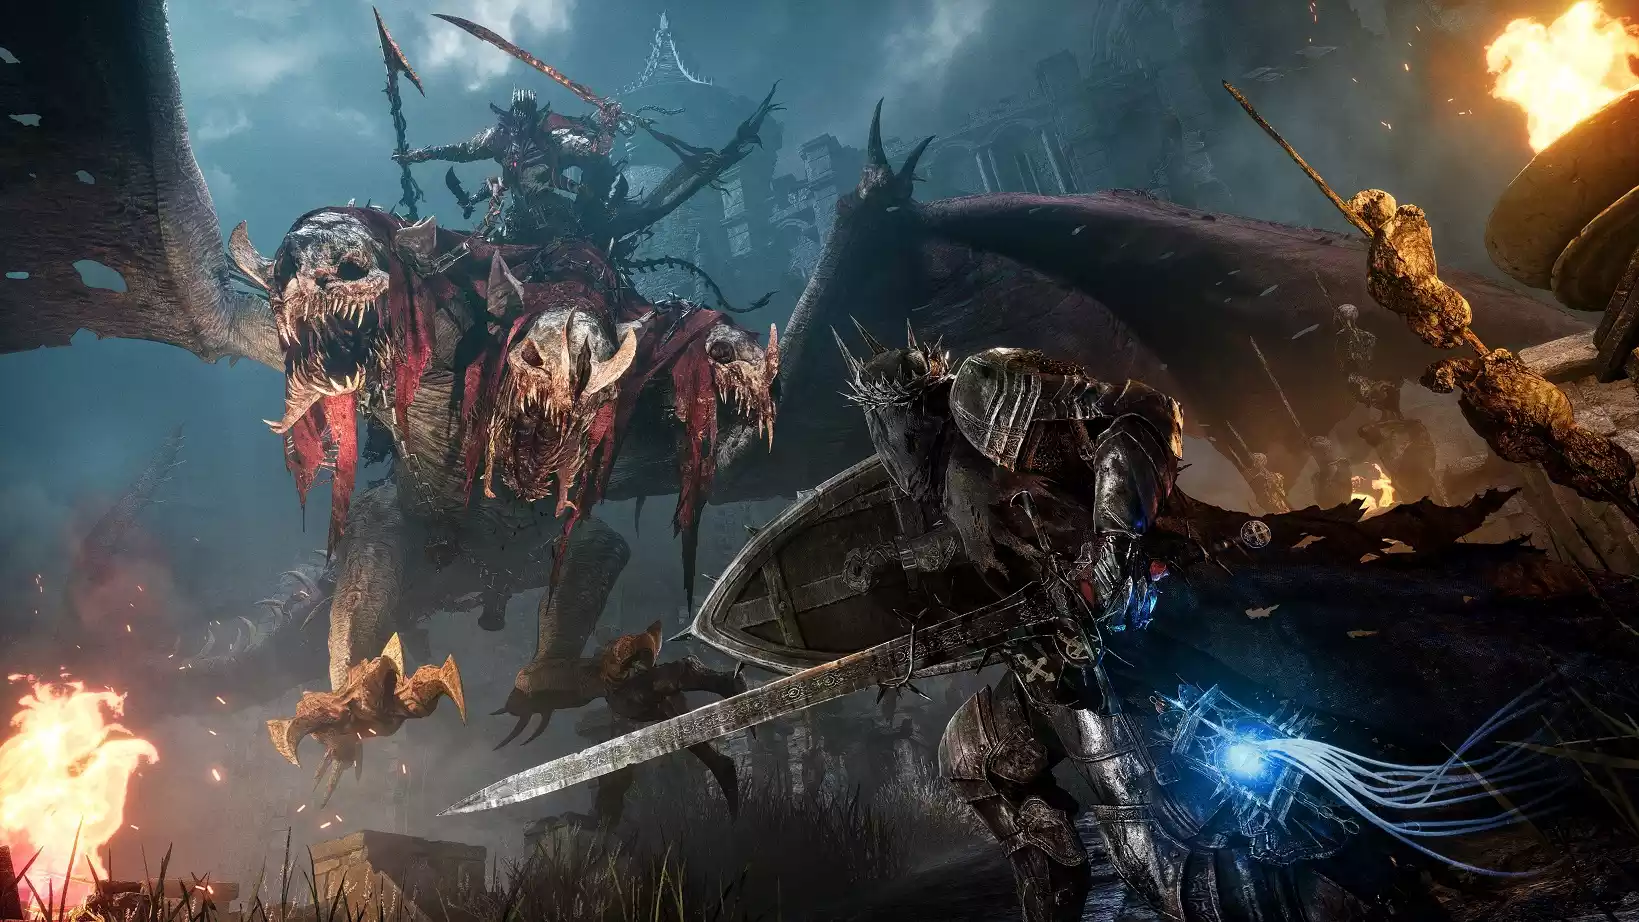 The Lords of the Fallen novas imagens